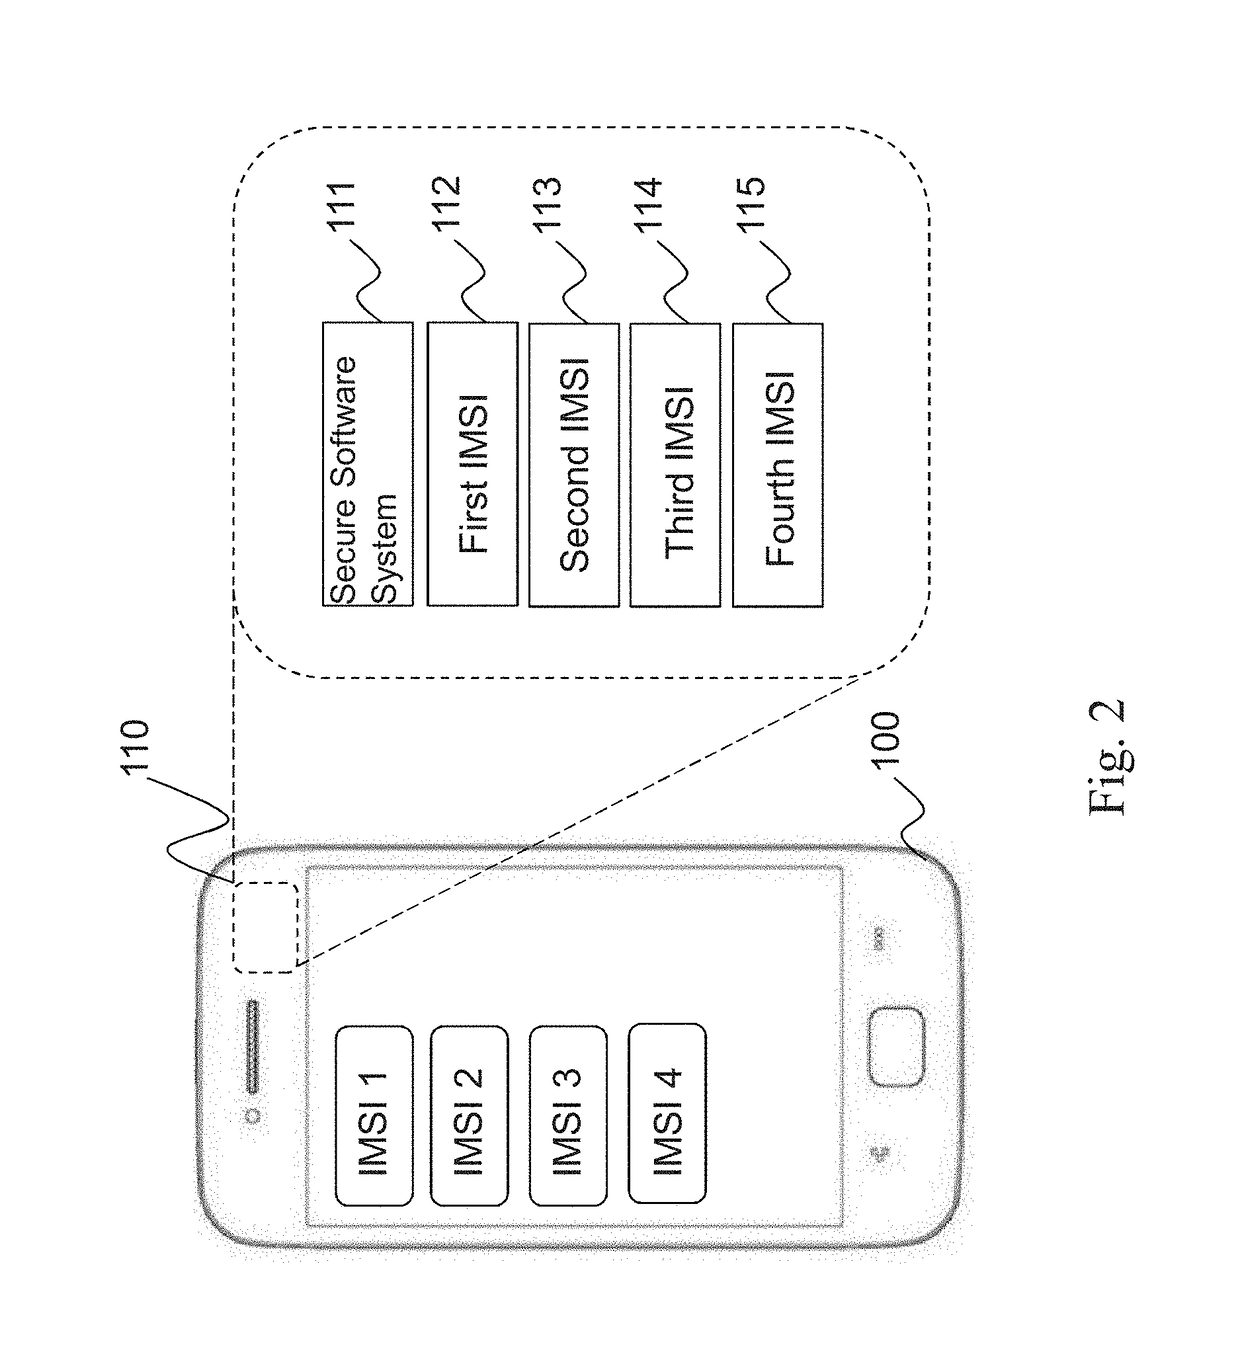 System for providing multiple services over mobile network using multiple imsis